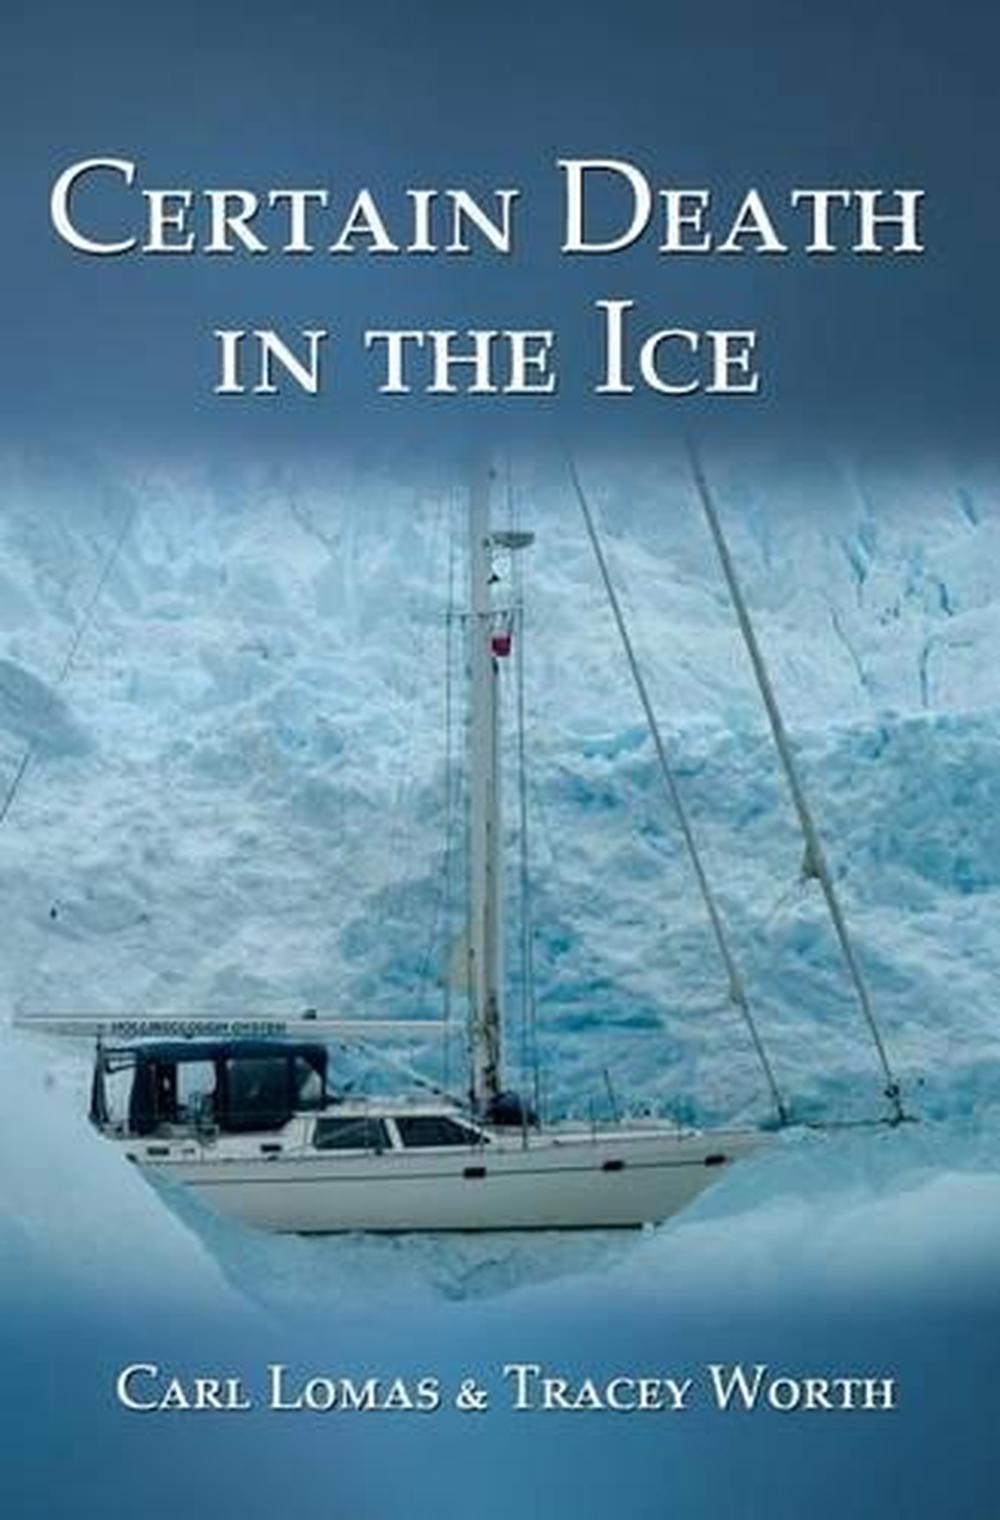 Death in the Time of Ice by Kaye George